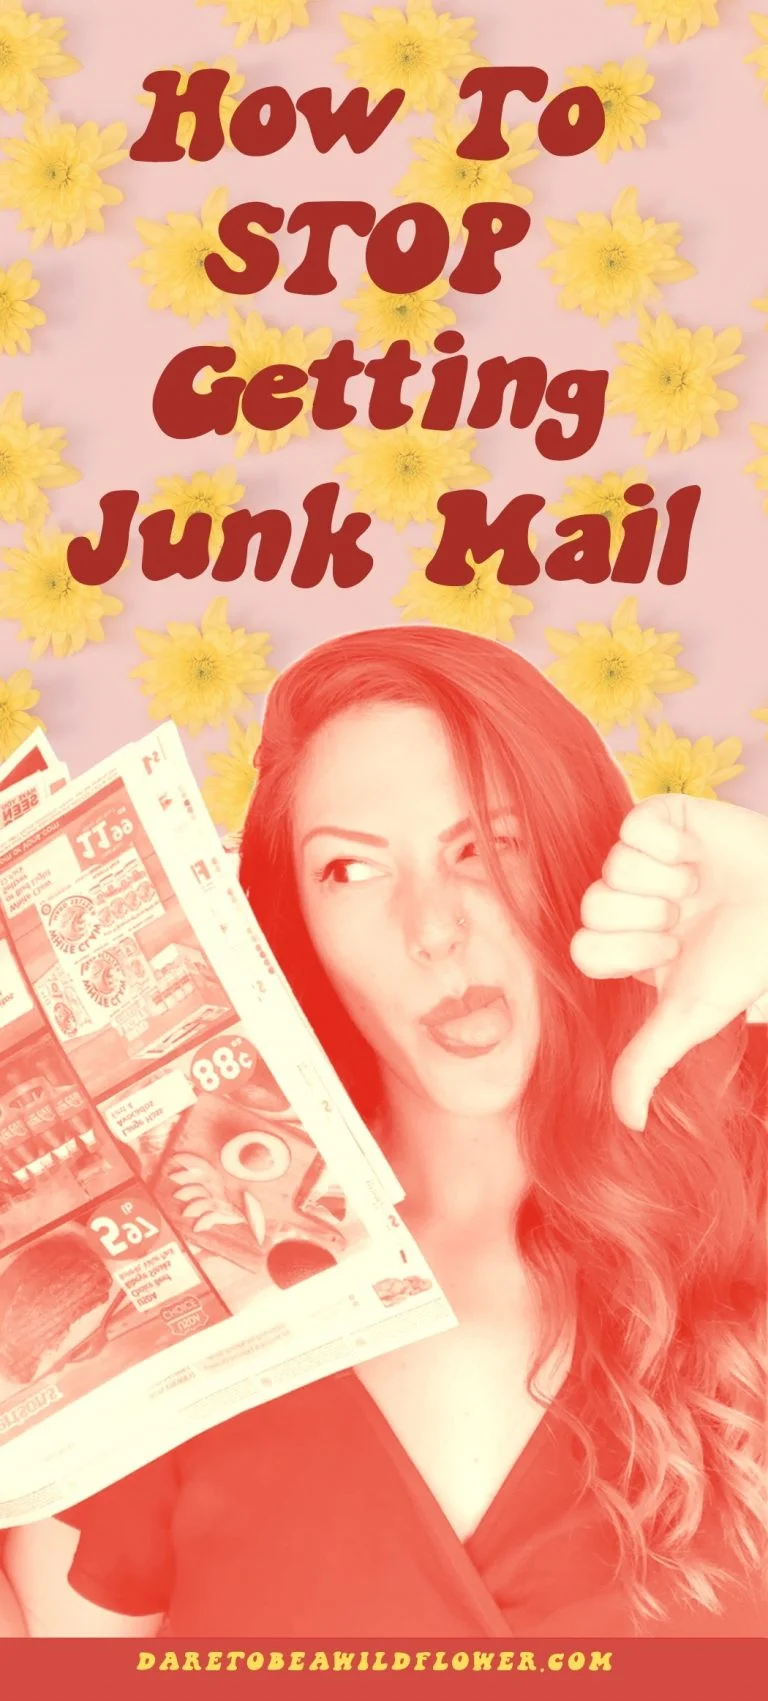 Stop junk mail forever in 4 easy steps